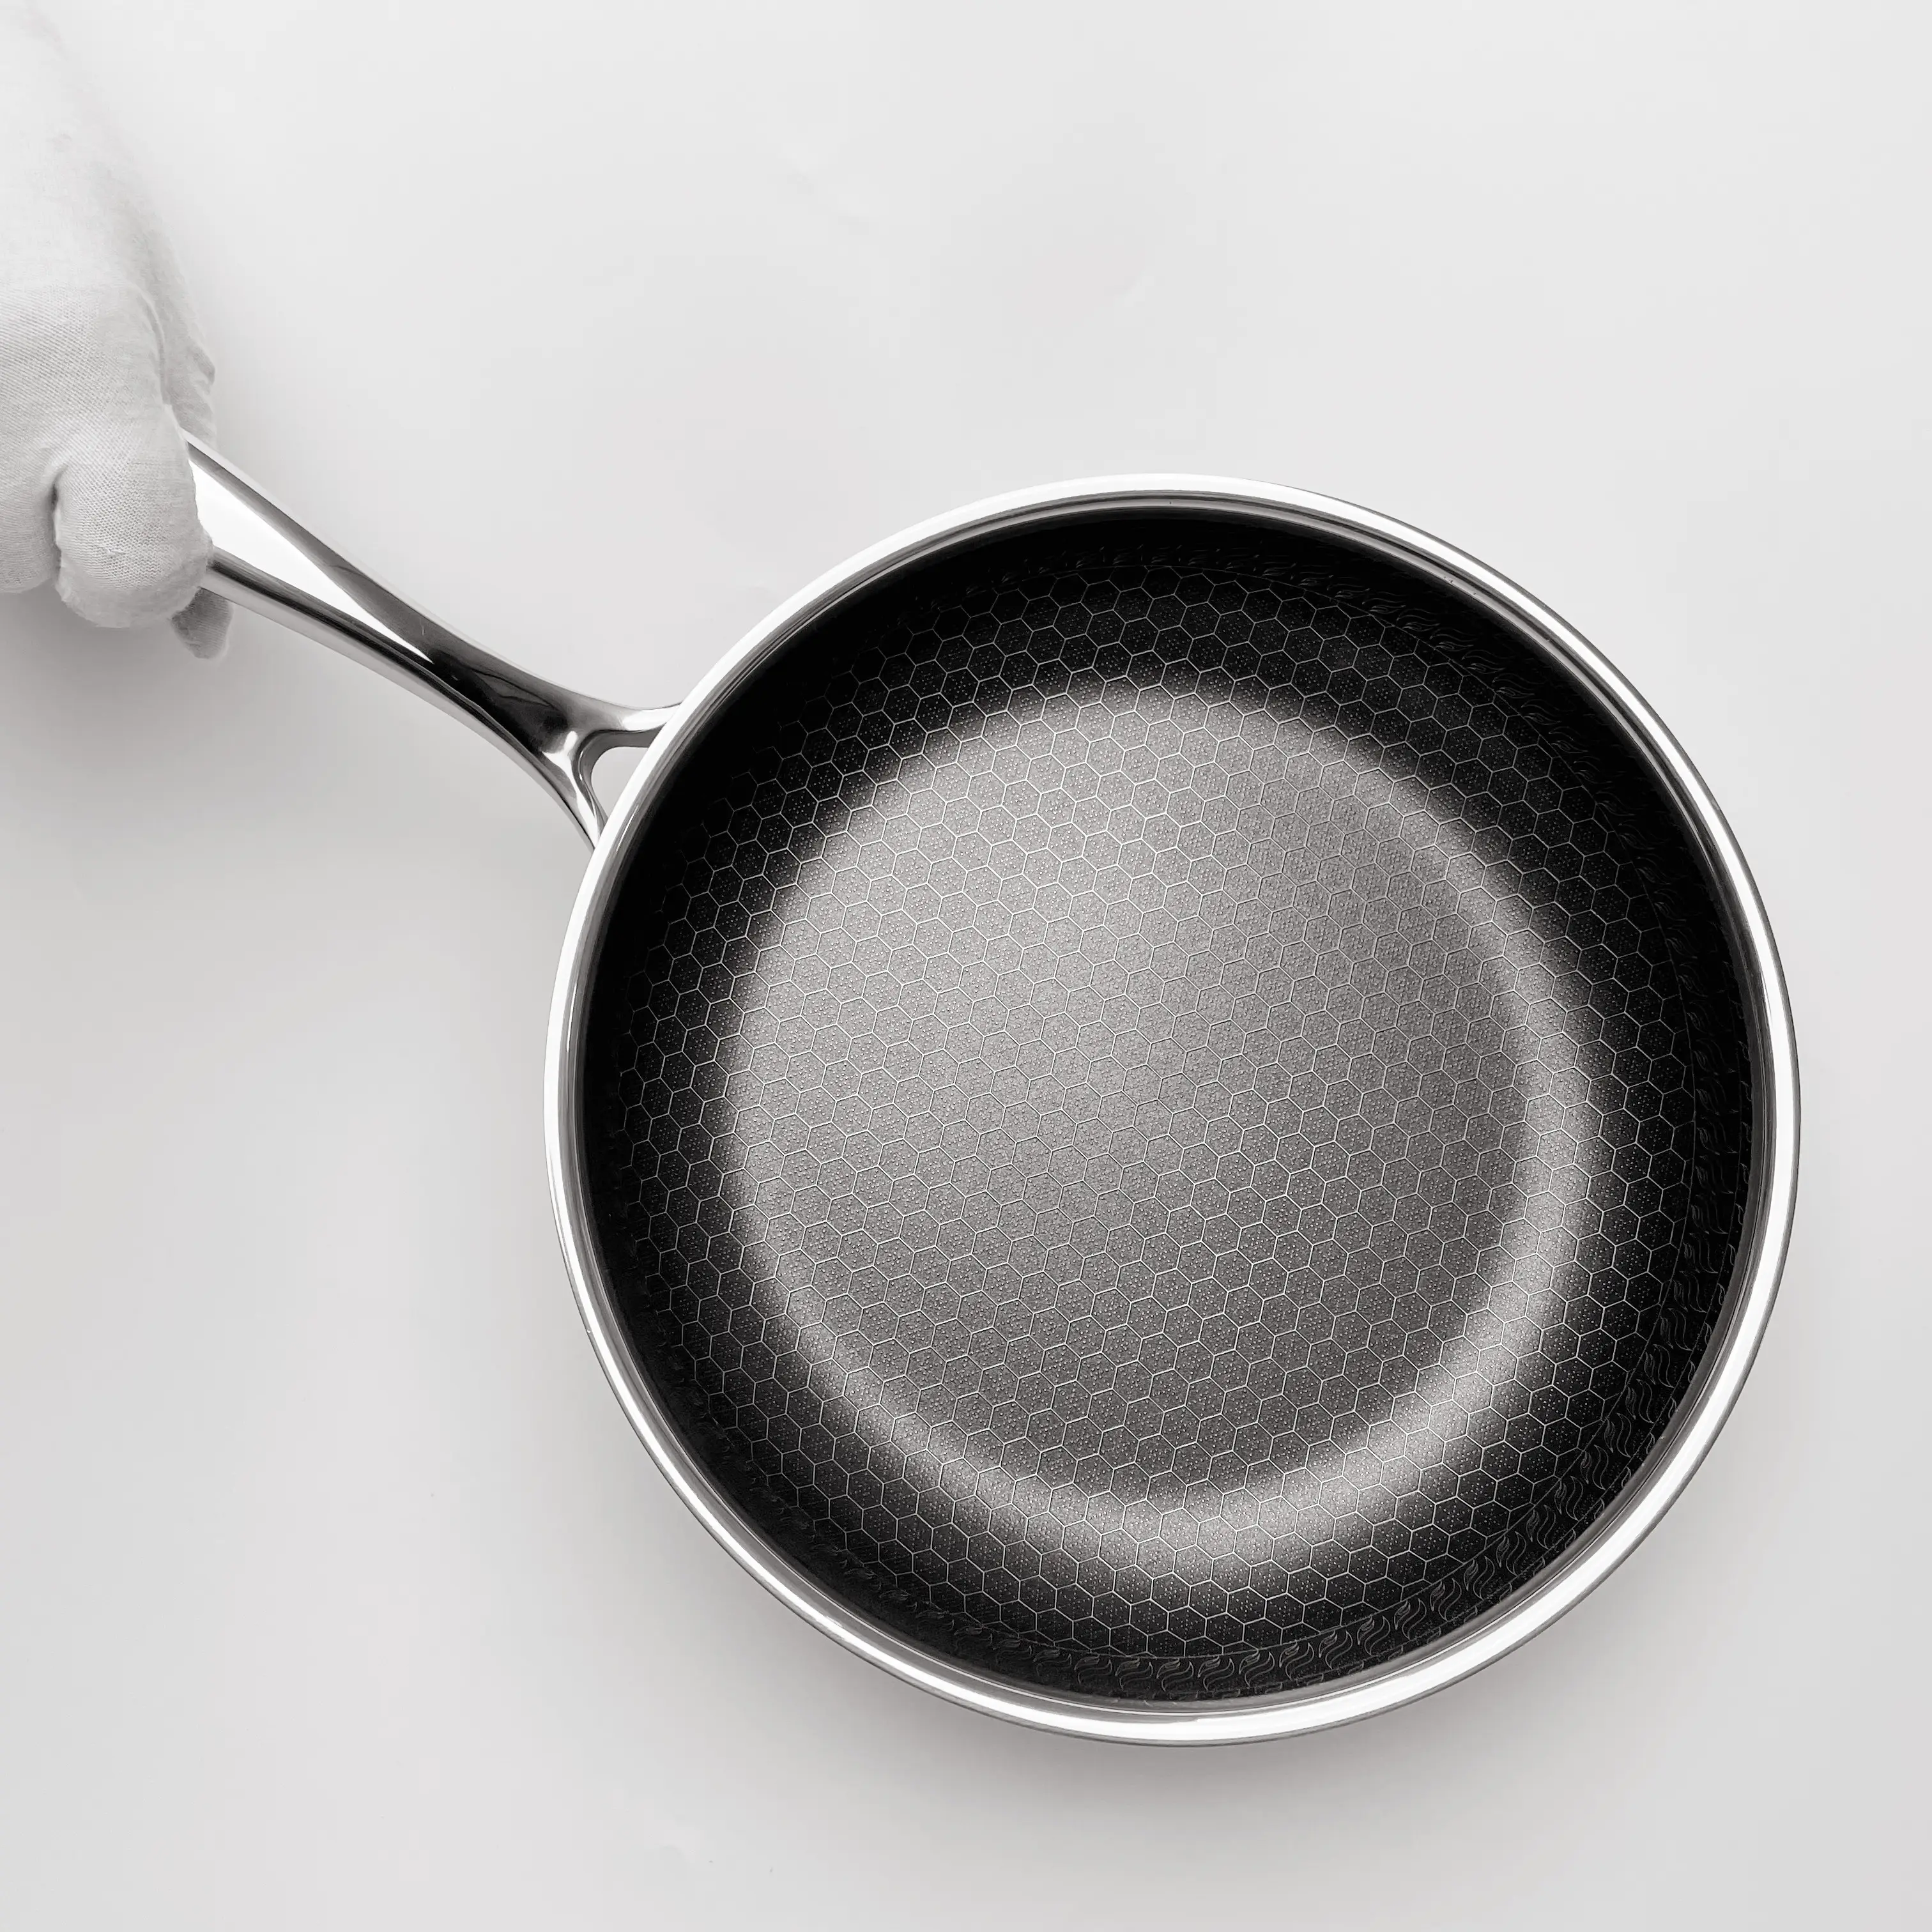 24cm Non-stick Frying Pan Tri-ply Stainless Steel Honeycomb Fry Pan Cooking With Long Handle